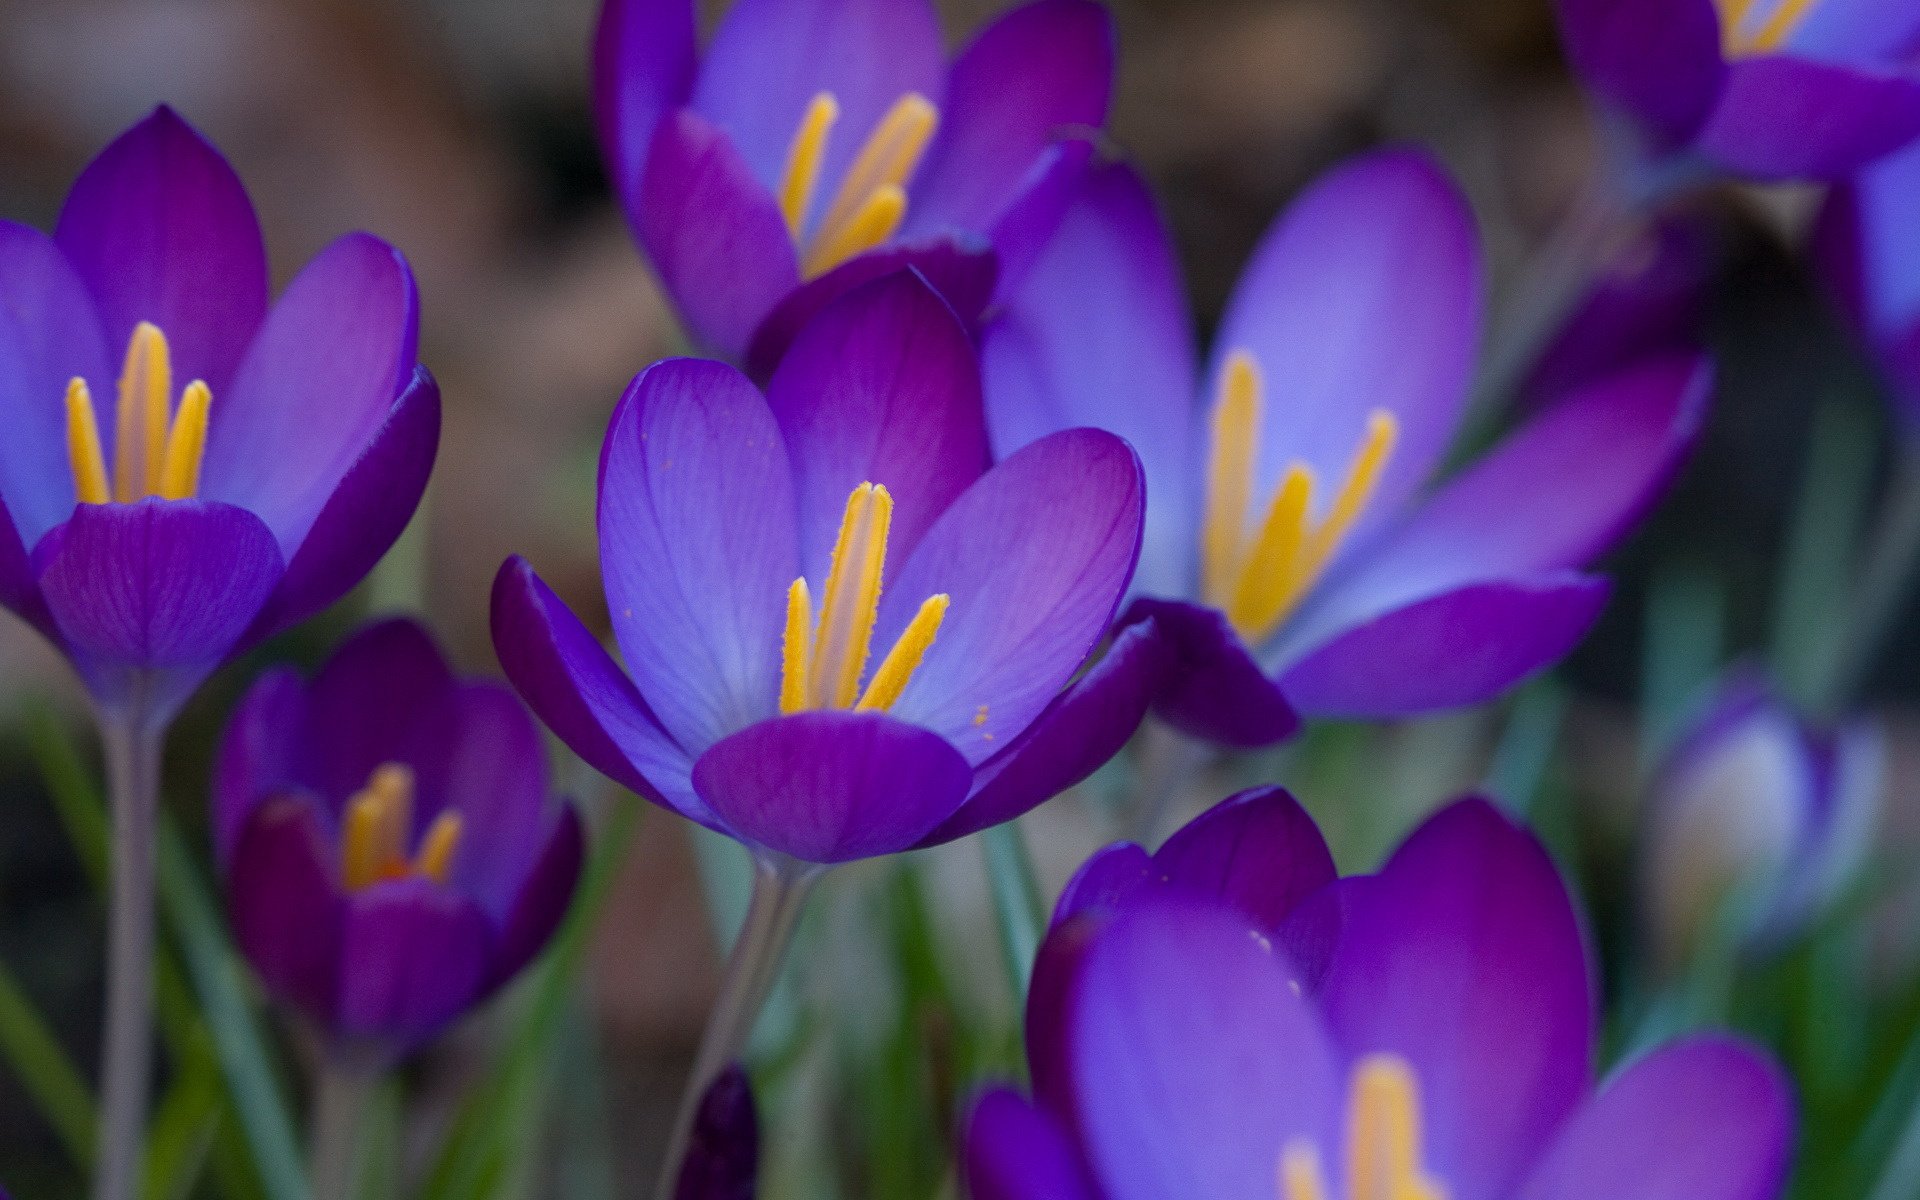 Spring crocuses are purple in color with yellow centers